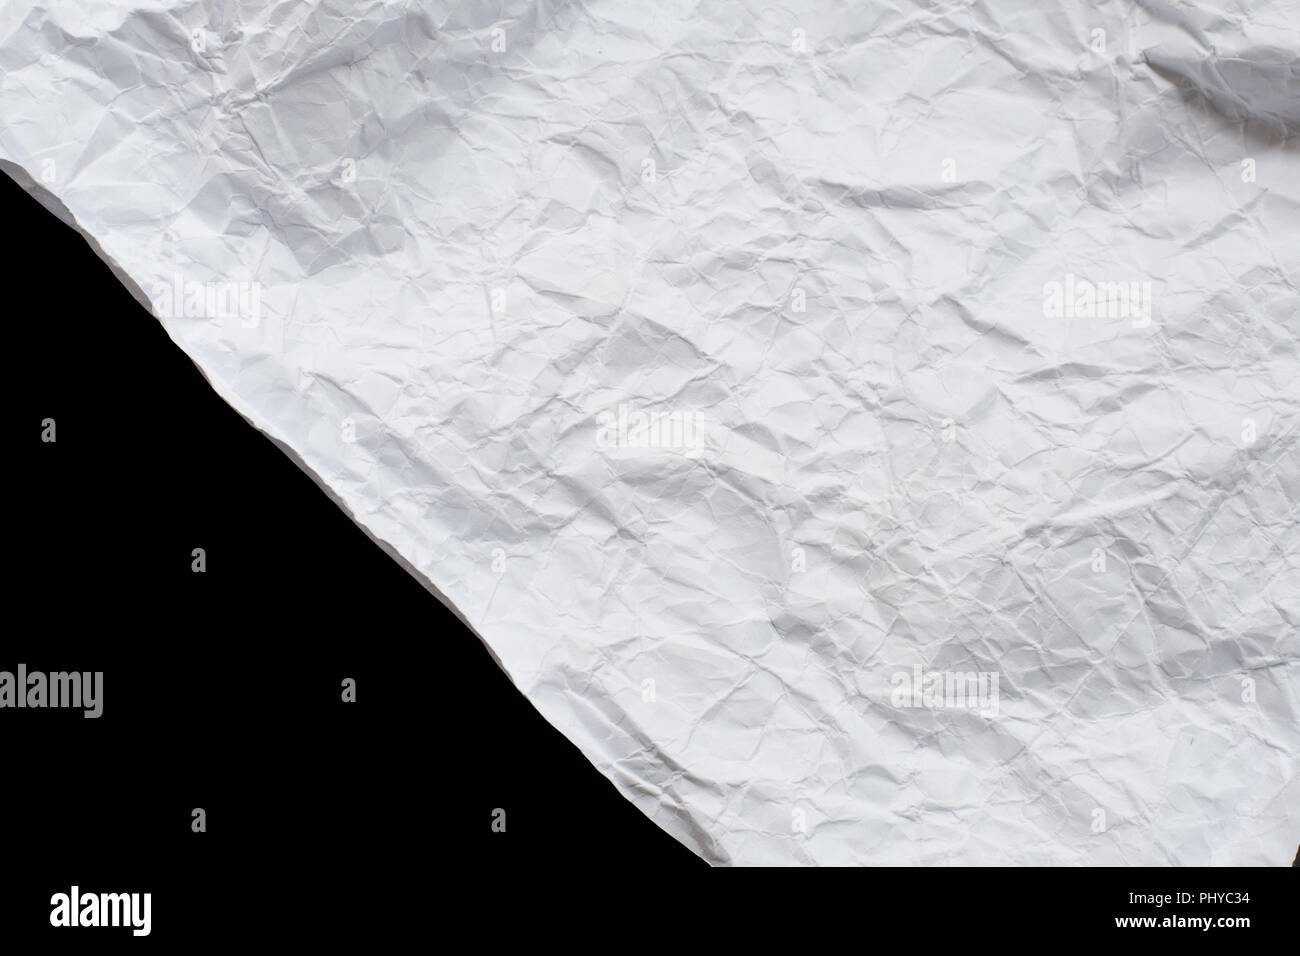 Paper texture. White crumpled paper isolated on black background Stock Photo